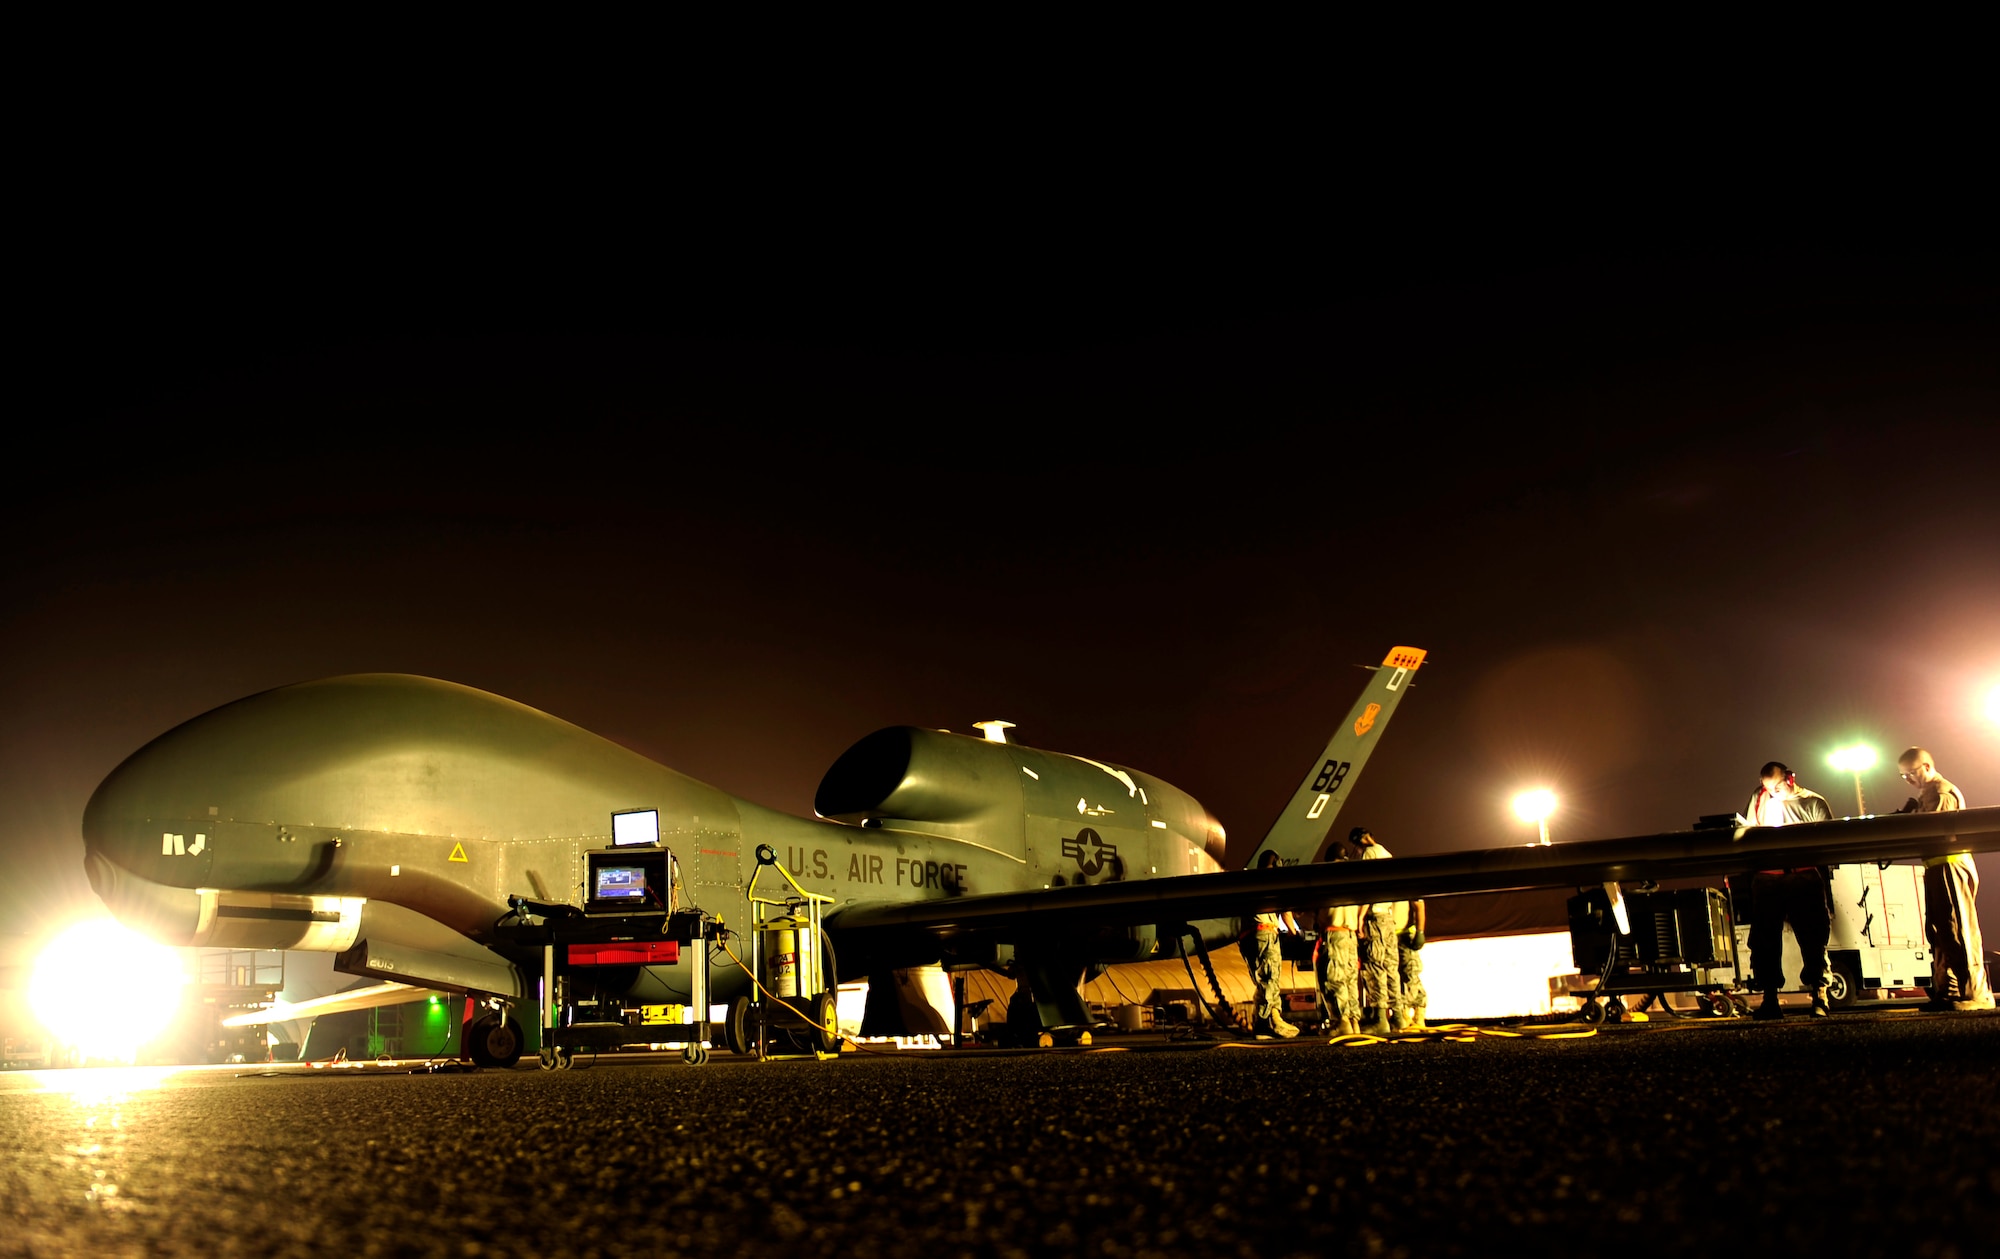 Robins Air Force Base is the first installation hosting an air Logistics Complex to receive an RQ-4 Global Hawk for paint and depaint work. Shown here, a Global Hawk is prepped for a mission at an undisclosed location.